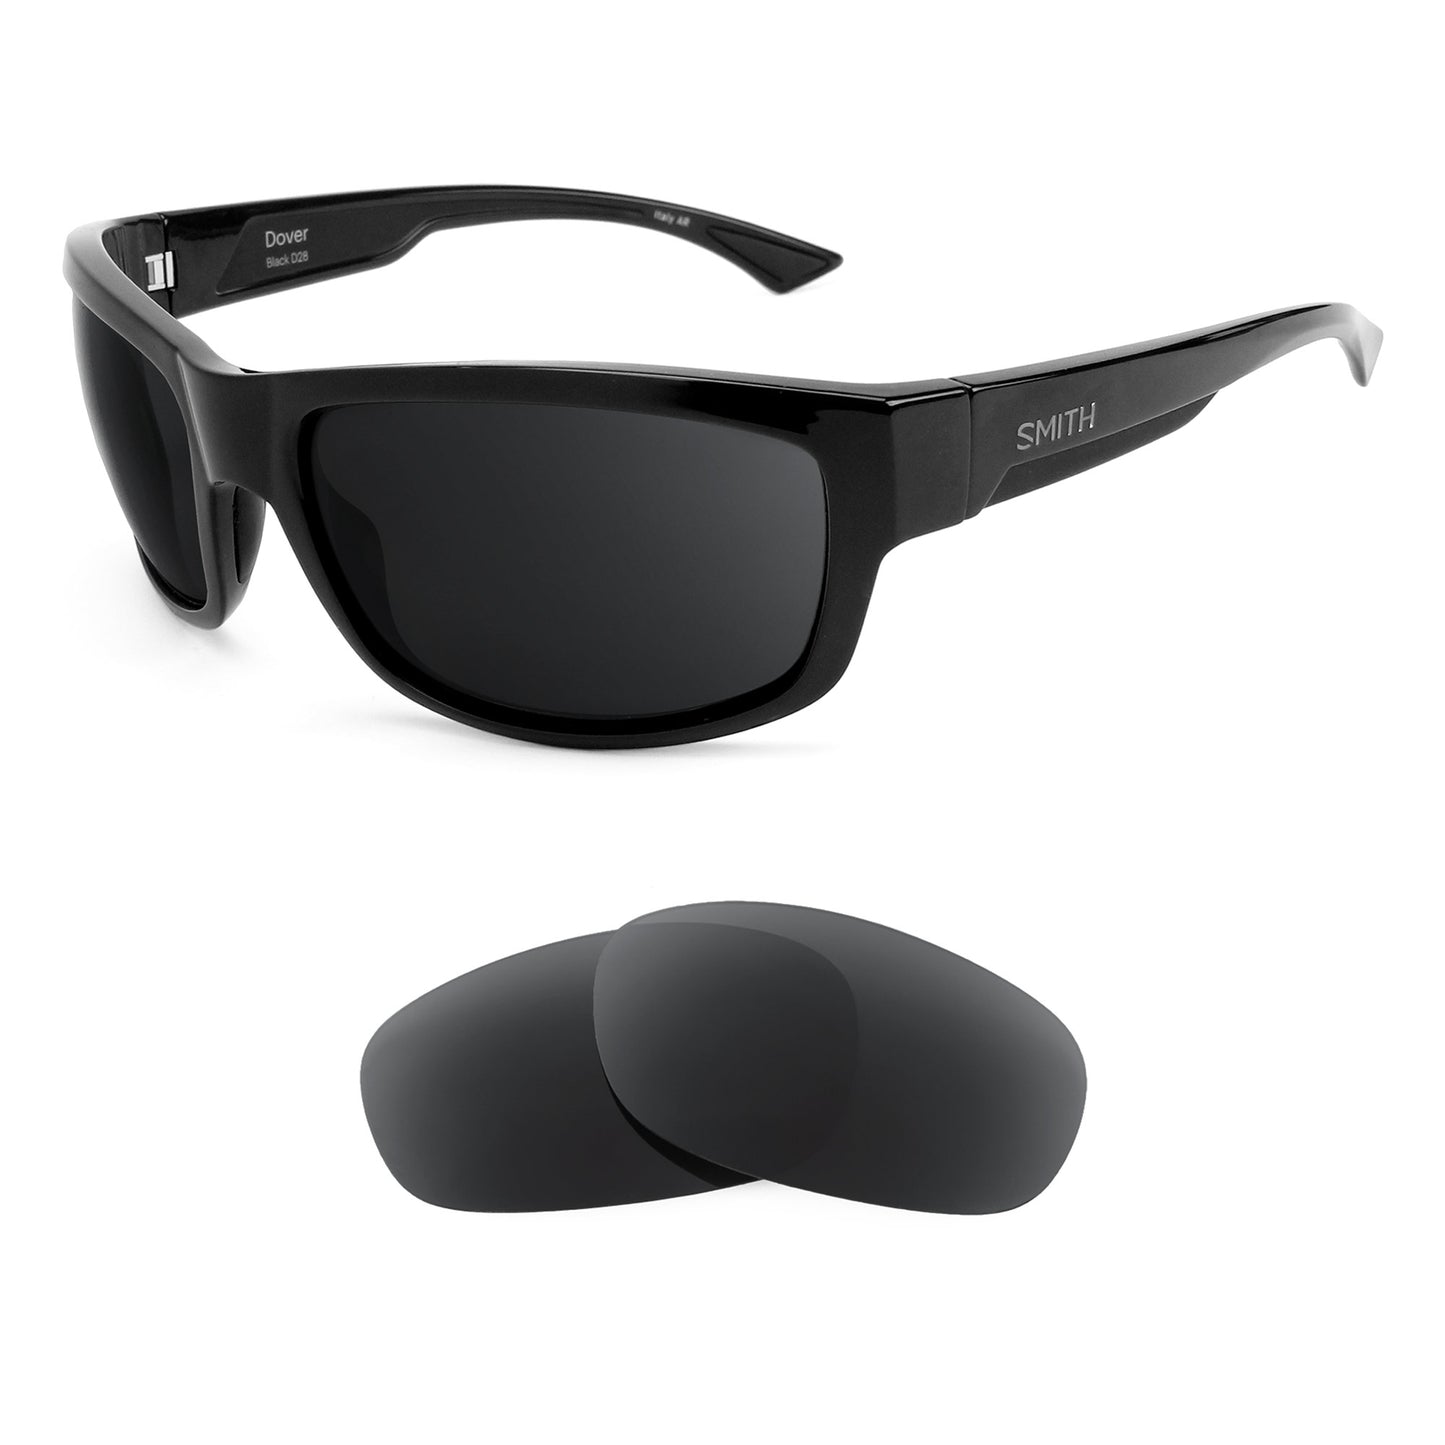 Smith Dover sunglasses with replacement lenses